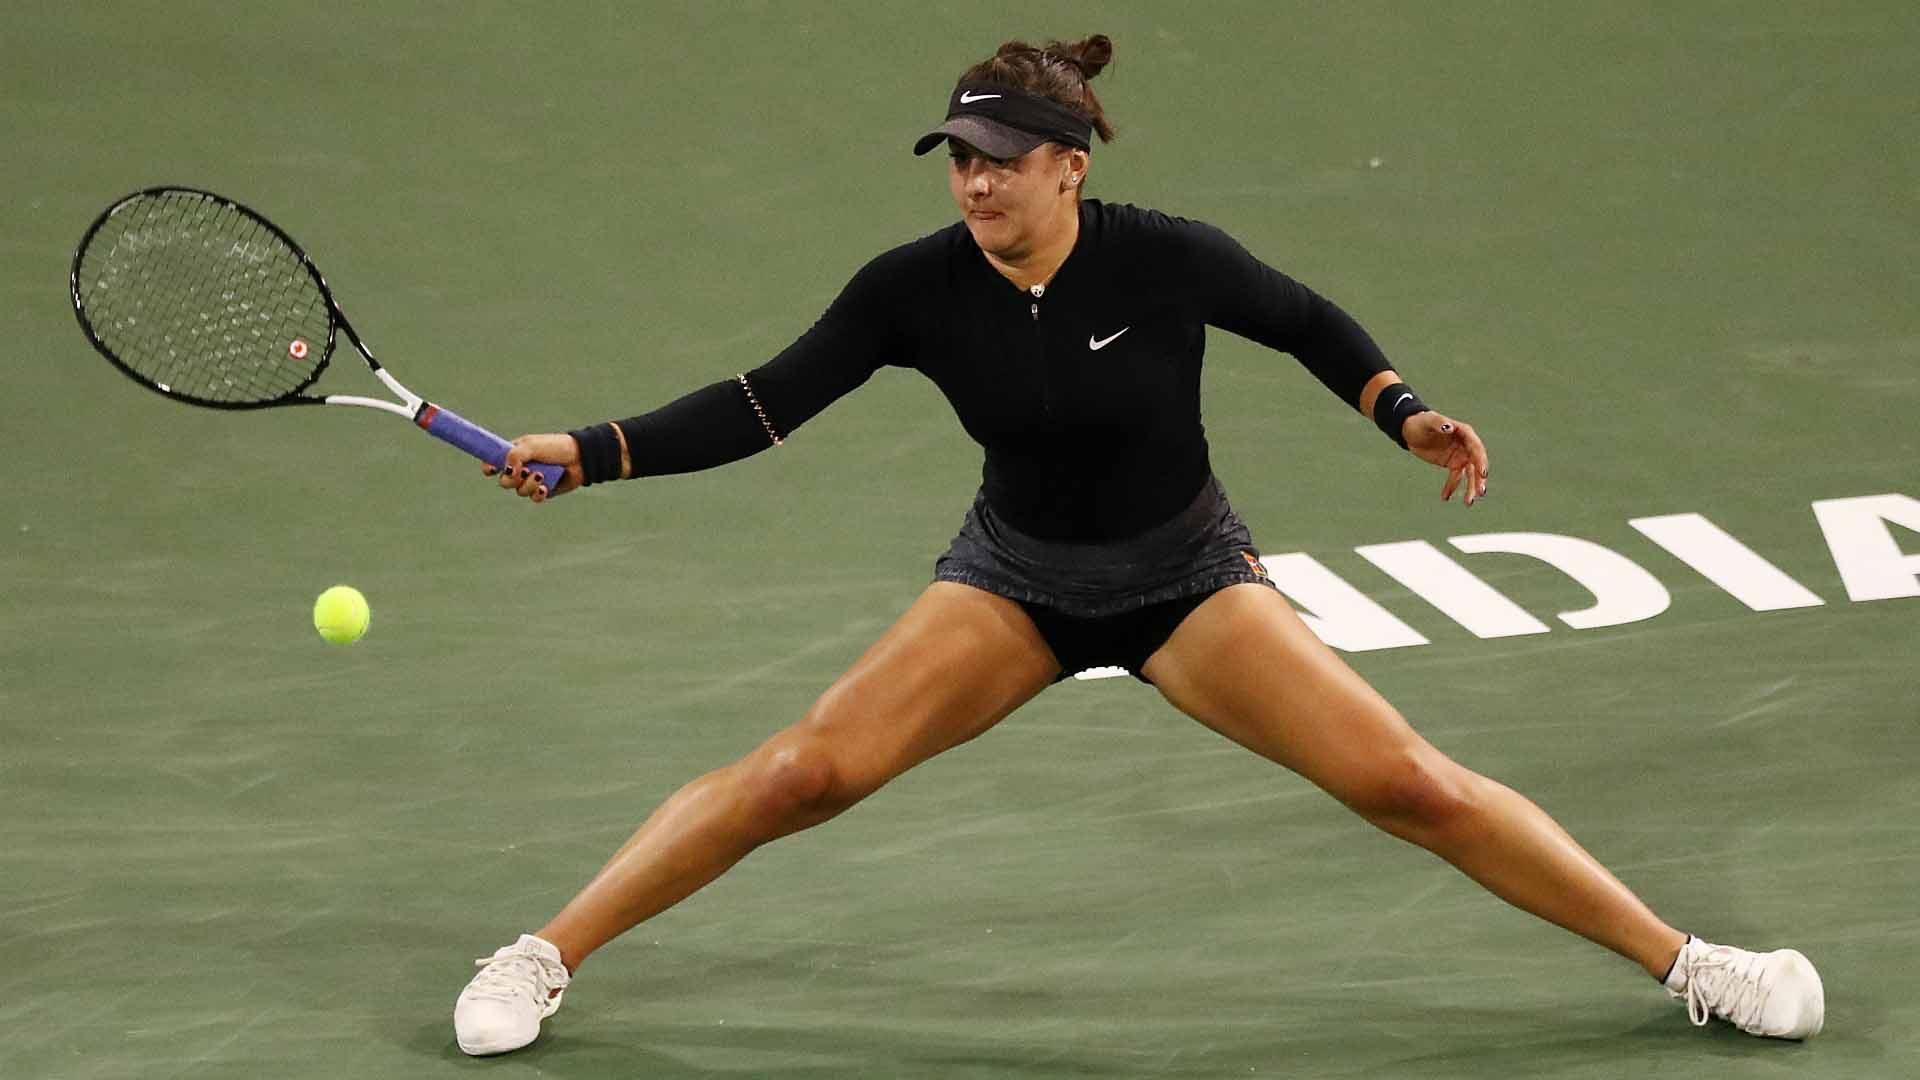 Andreescu overcomes fatigue and Svitolina to reach Indian Wells